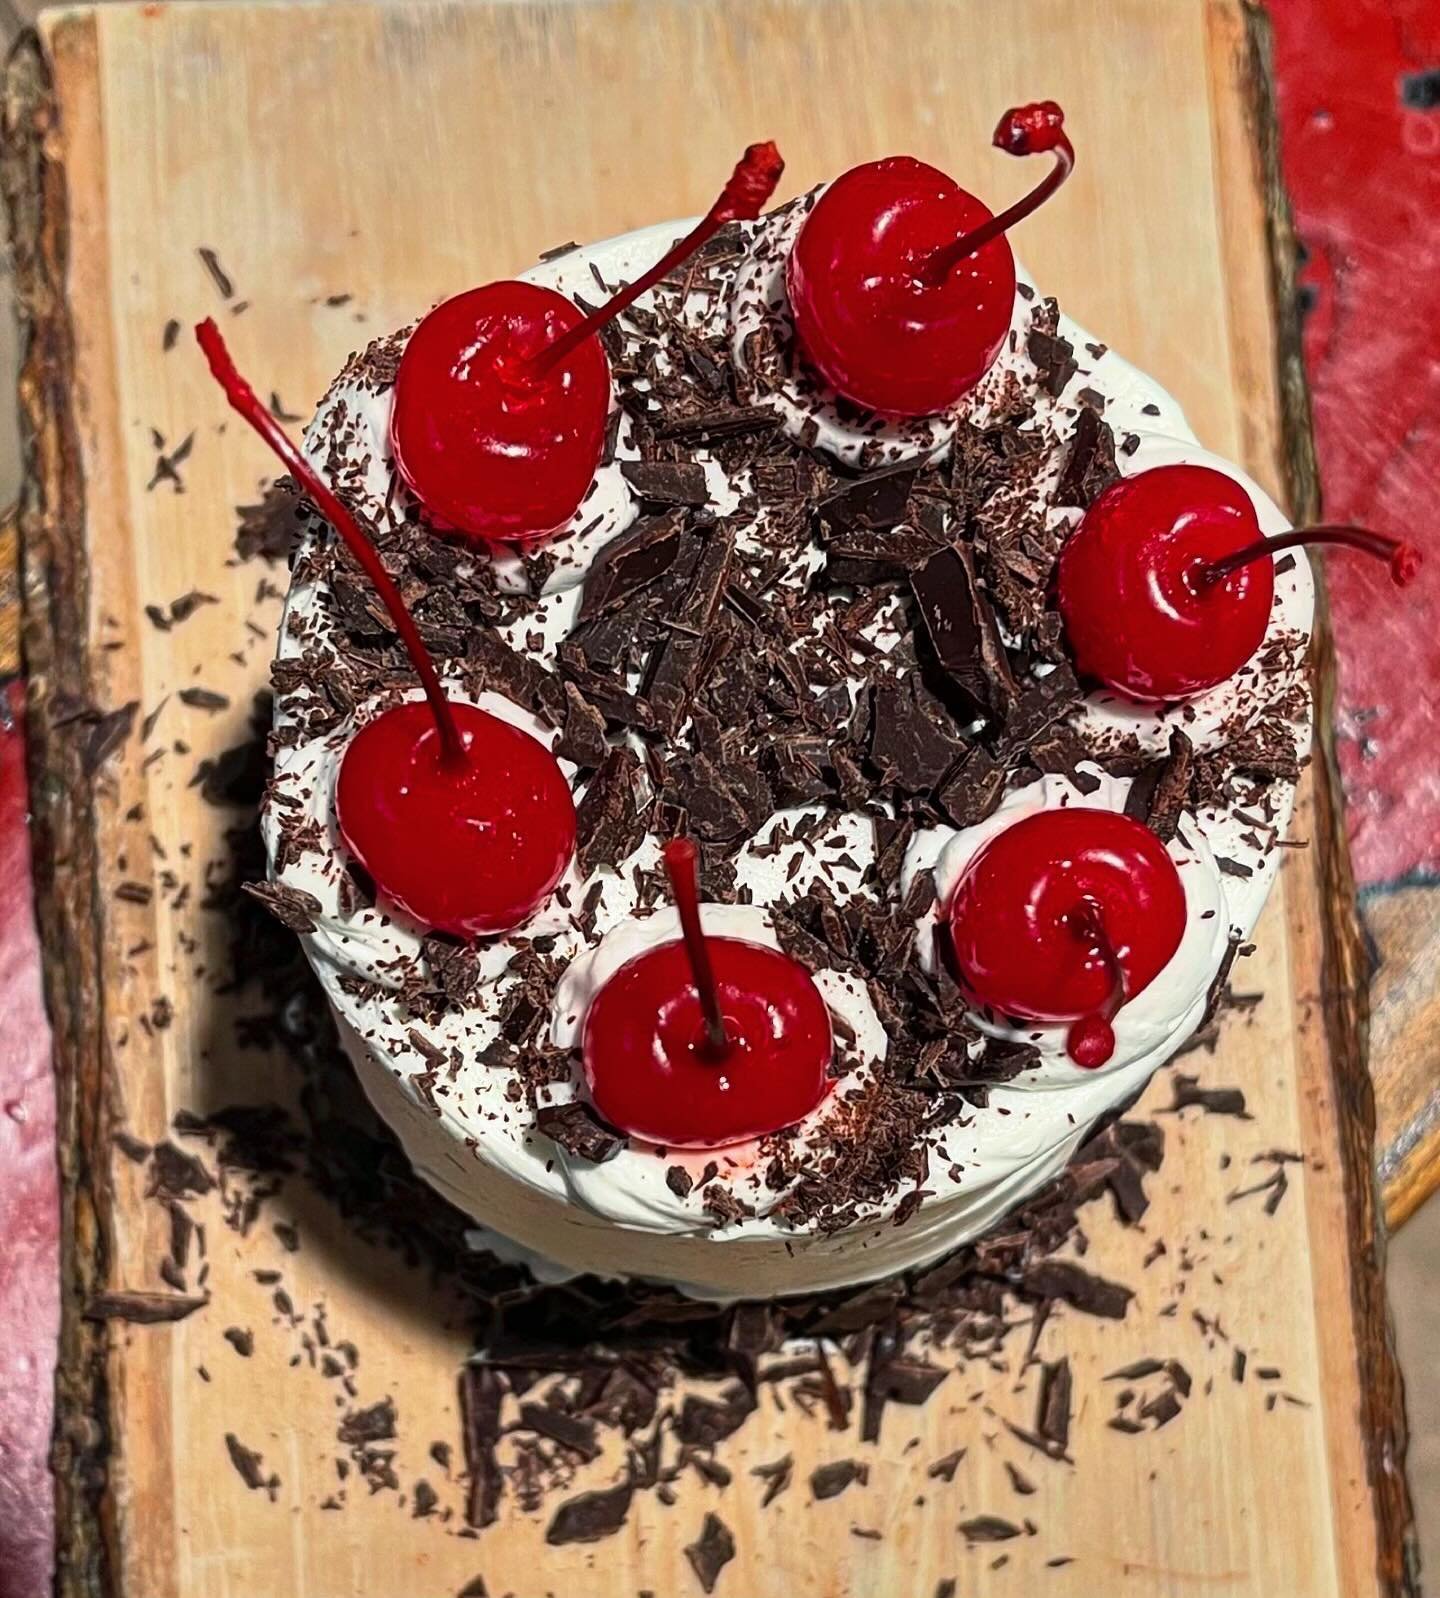 Black Forest Cake! One of the first cakes I learned how to make. This was a must for our high school Oktoberfest&hellip;resulting in Kirschwasser being some of the first alcohol I tried as well 🤣 #veganblackforestcake #kirschwasser #vegancake